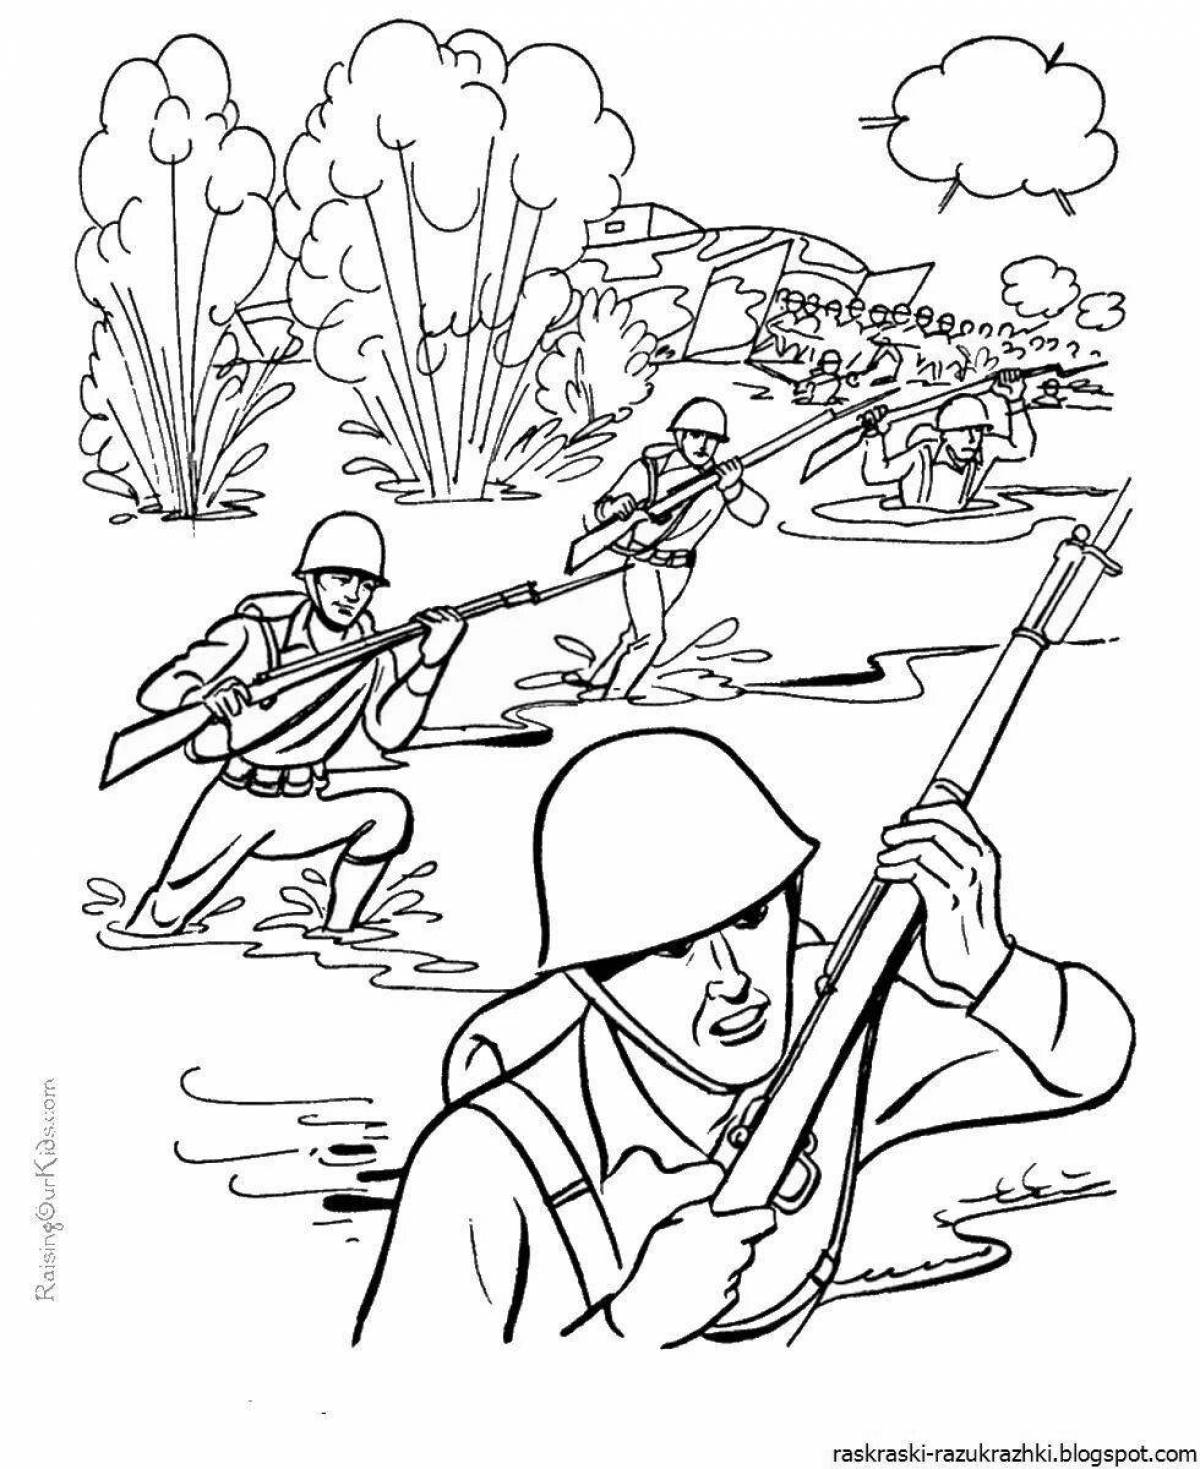 Glowing soldier and child coloring page